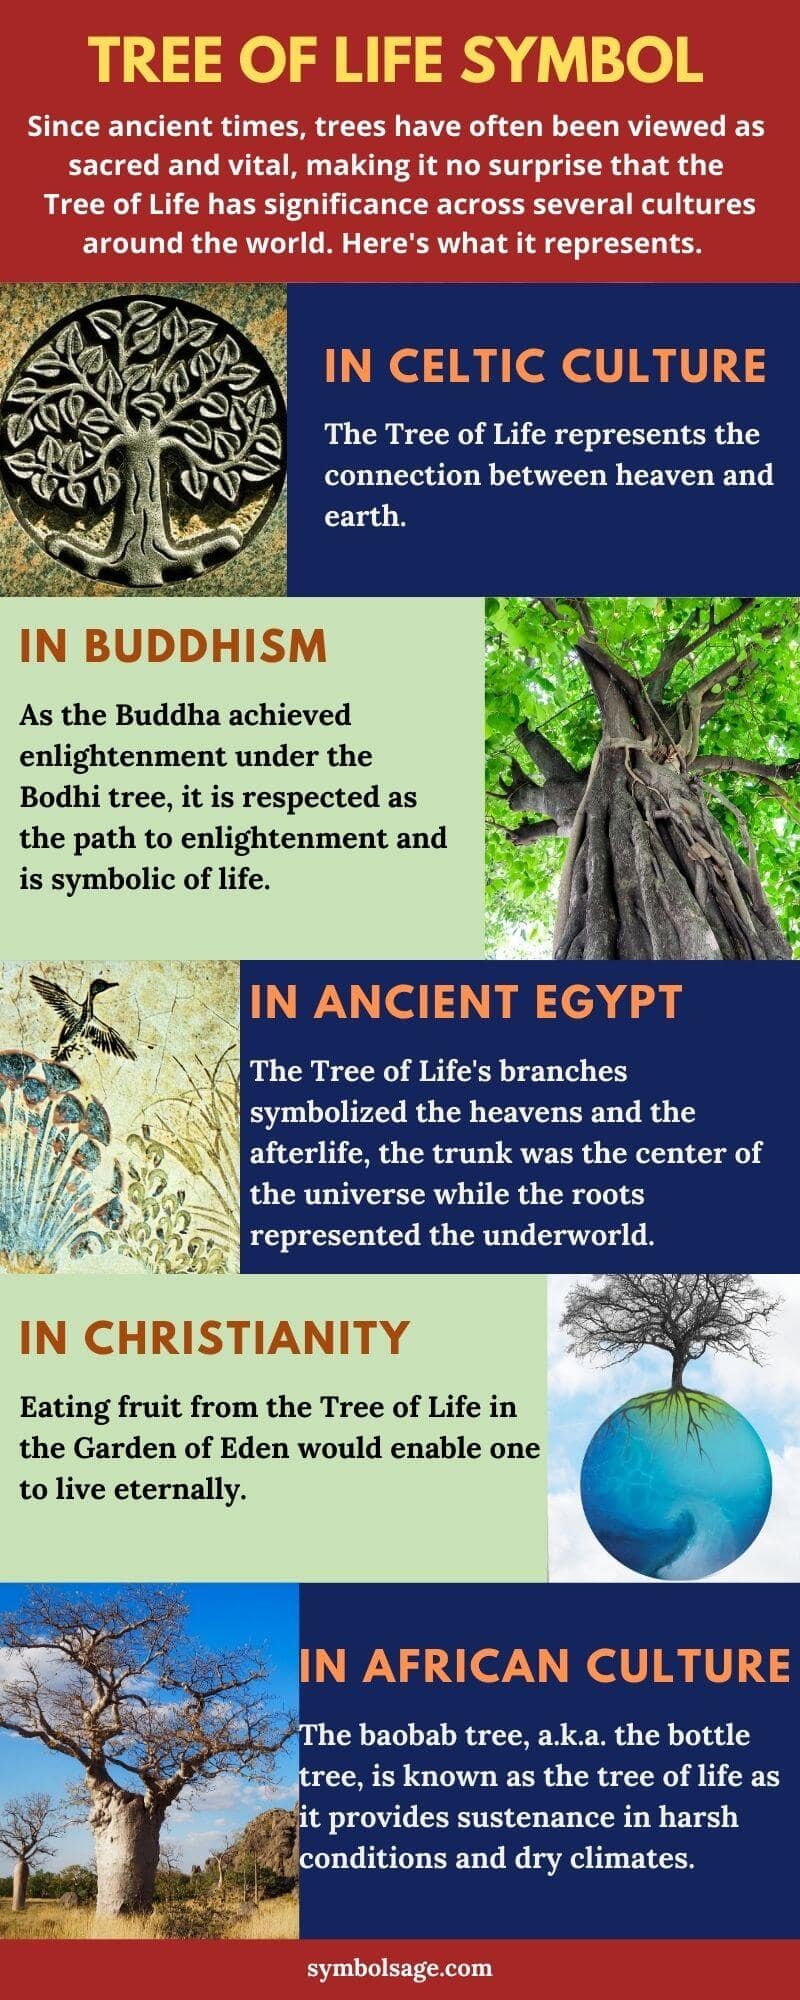 Tree of life symbol meaning in different cultures